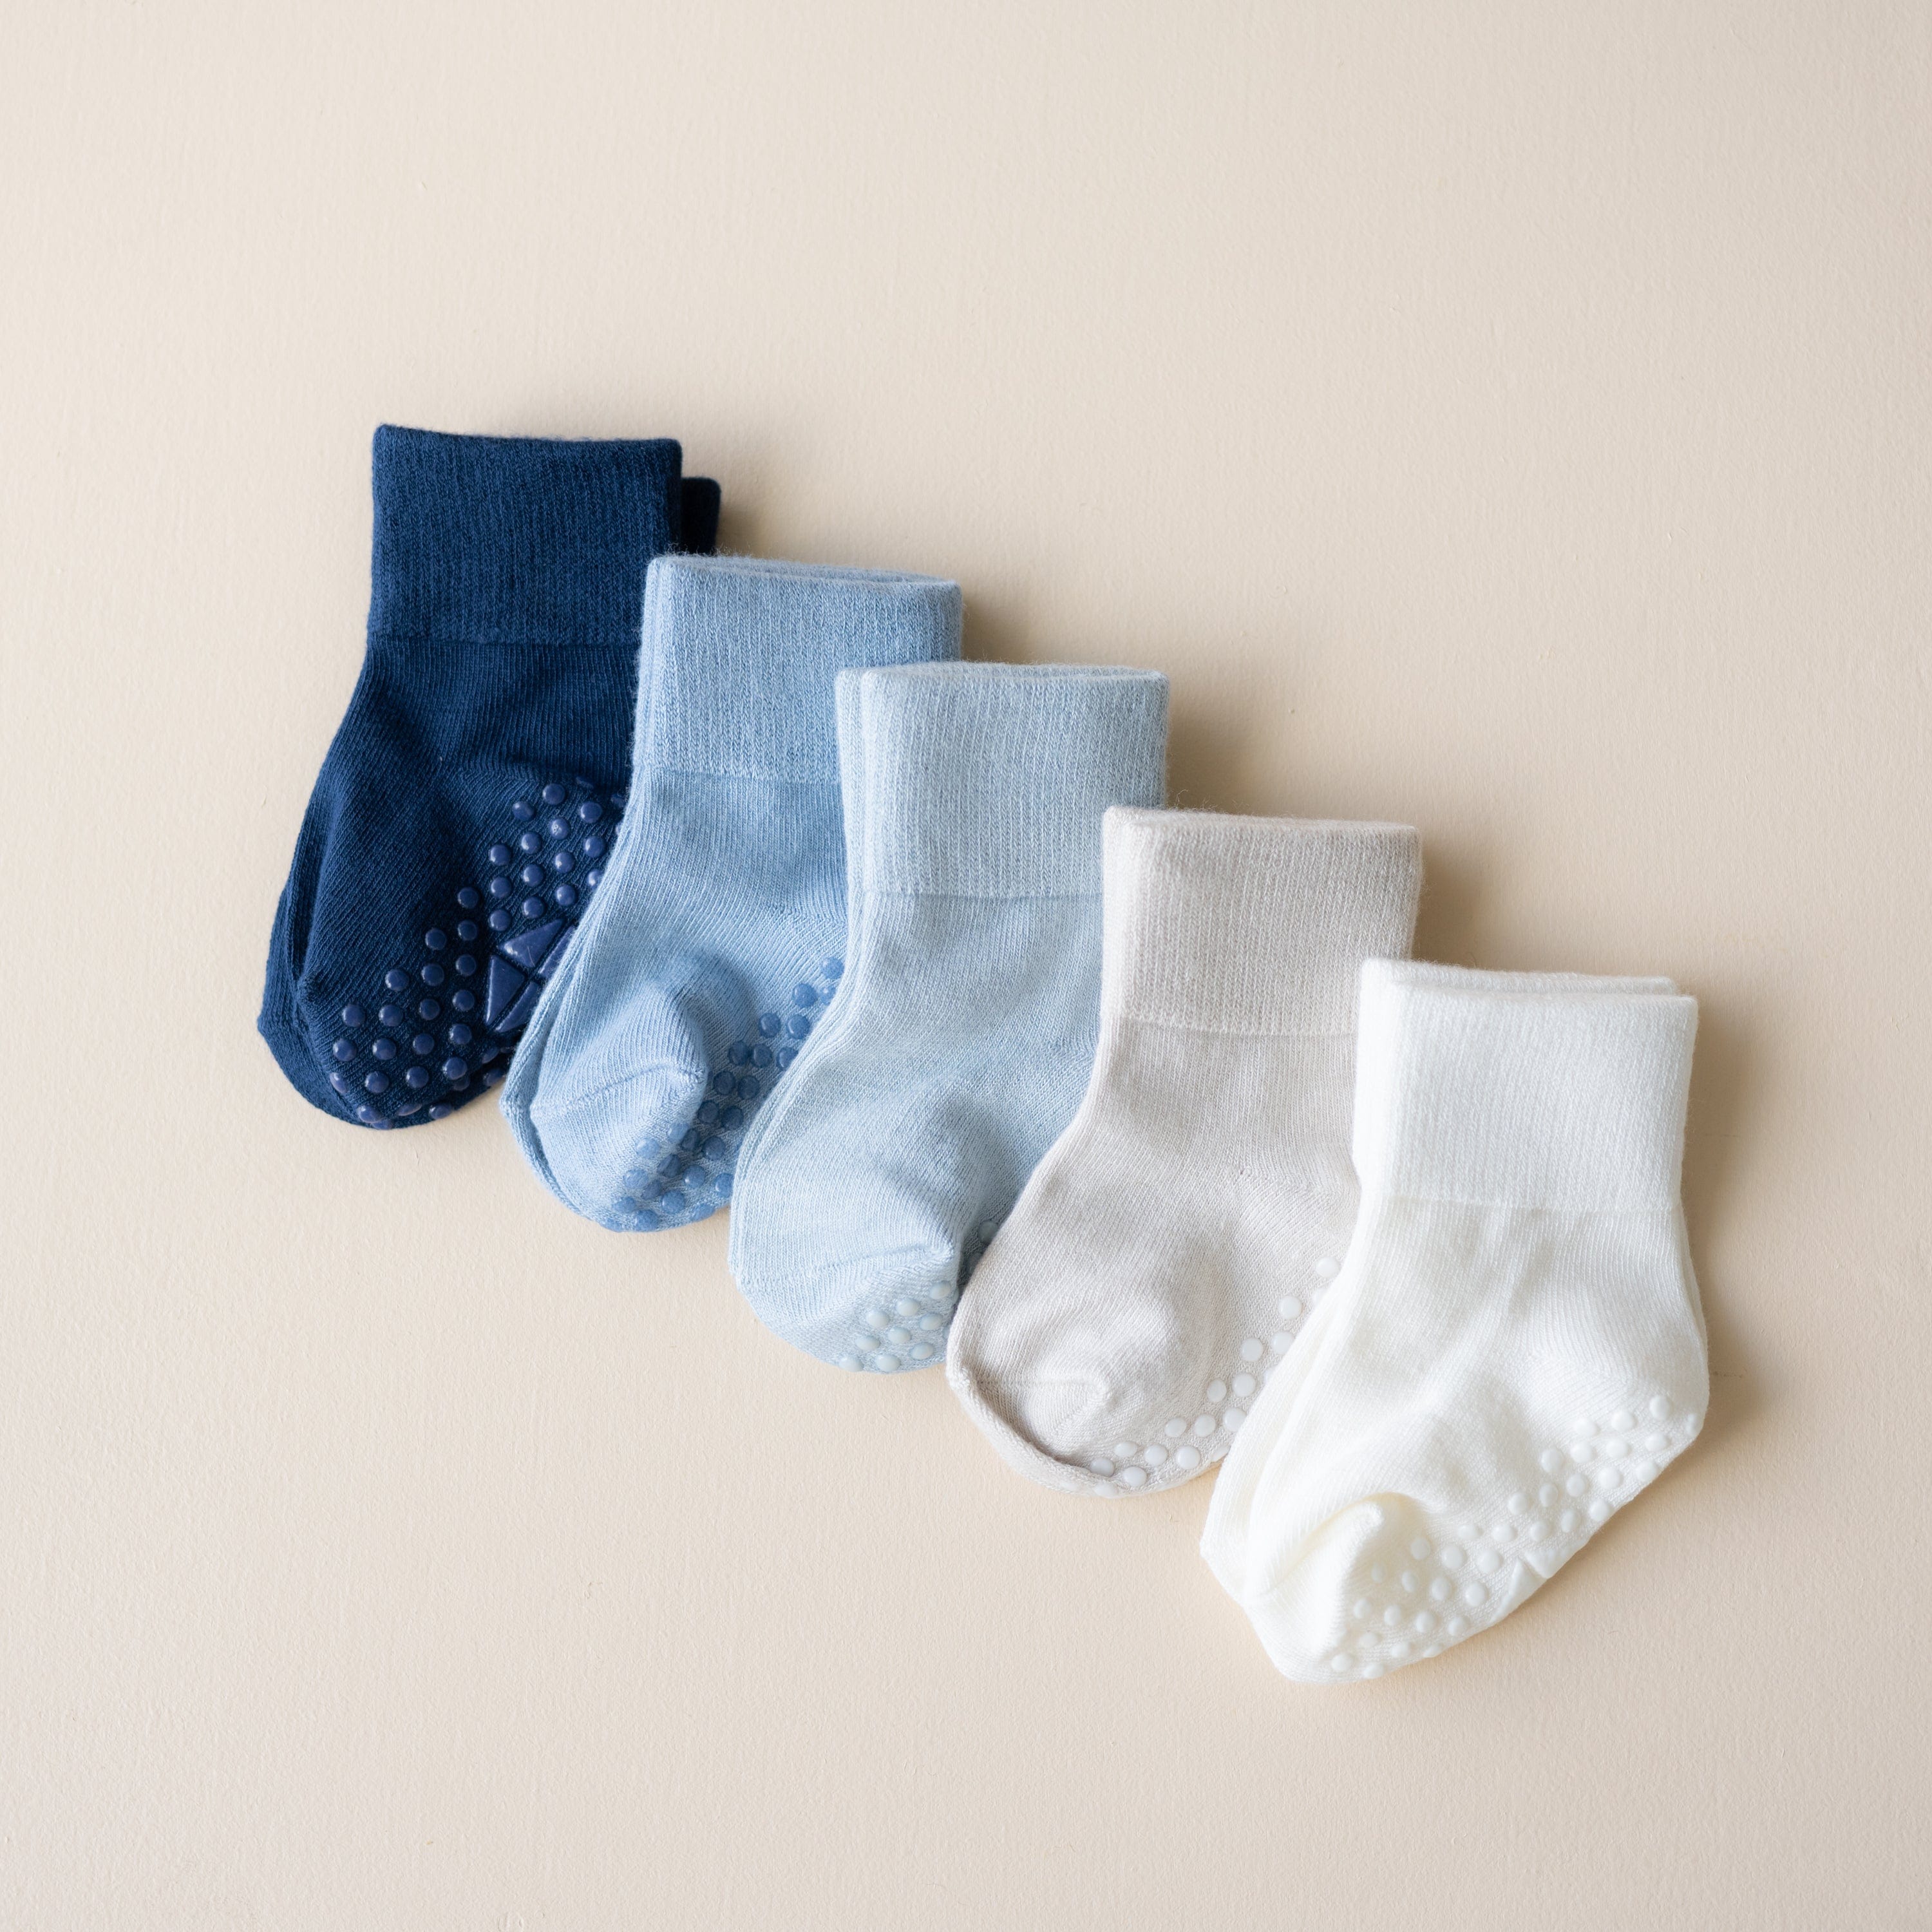 Low Cut Socks - Choose your Favorite Color Pack - GoWith